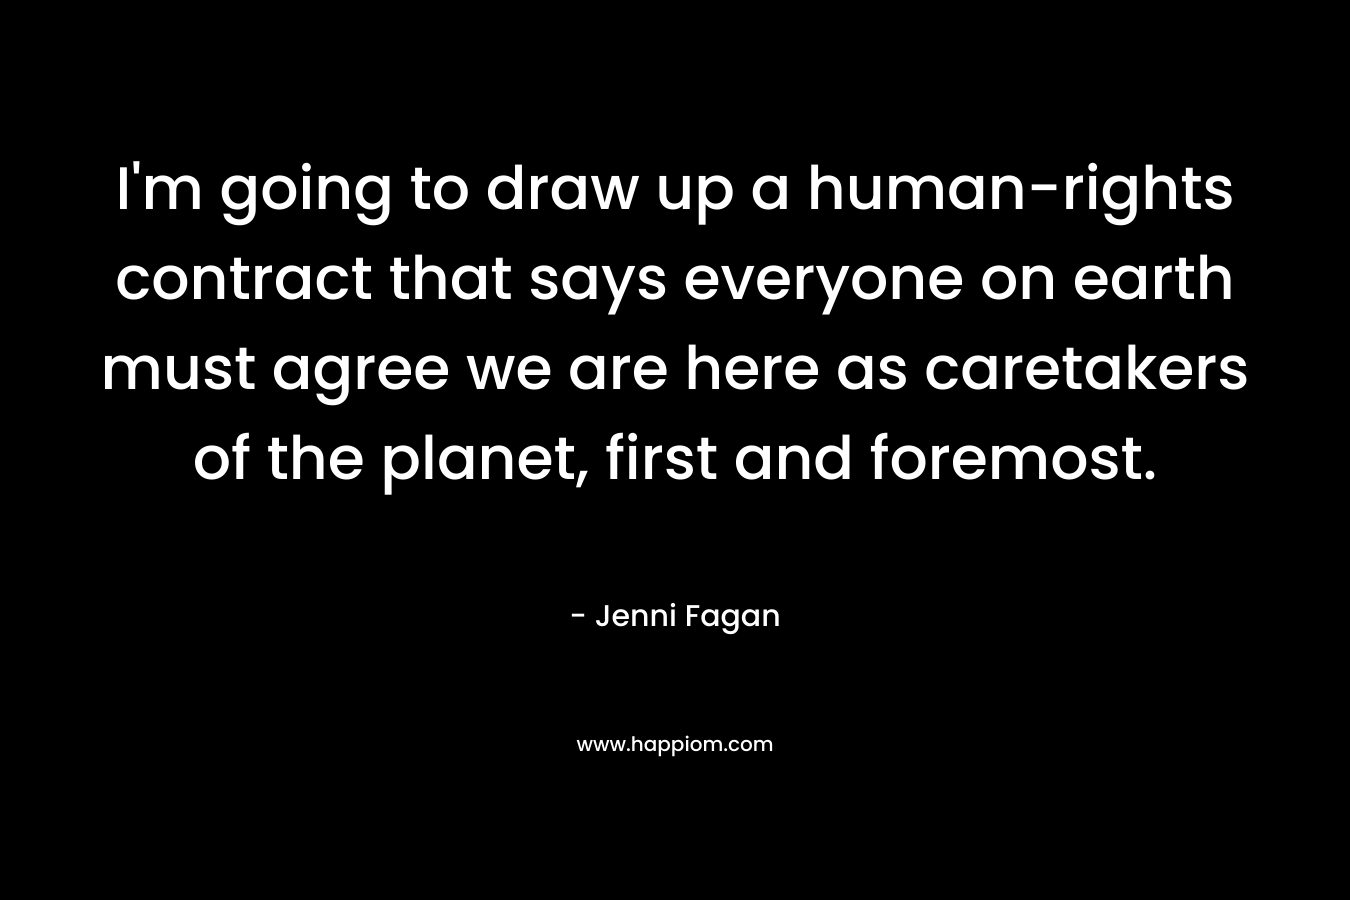 I'm going to draw up a human-rights contract that says everyone on earth must agree we are here as caretakers of the planet, first and foremost.